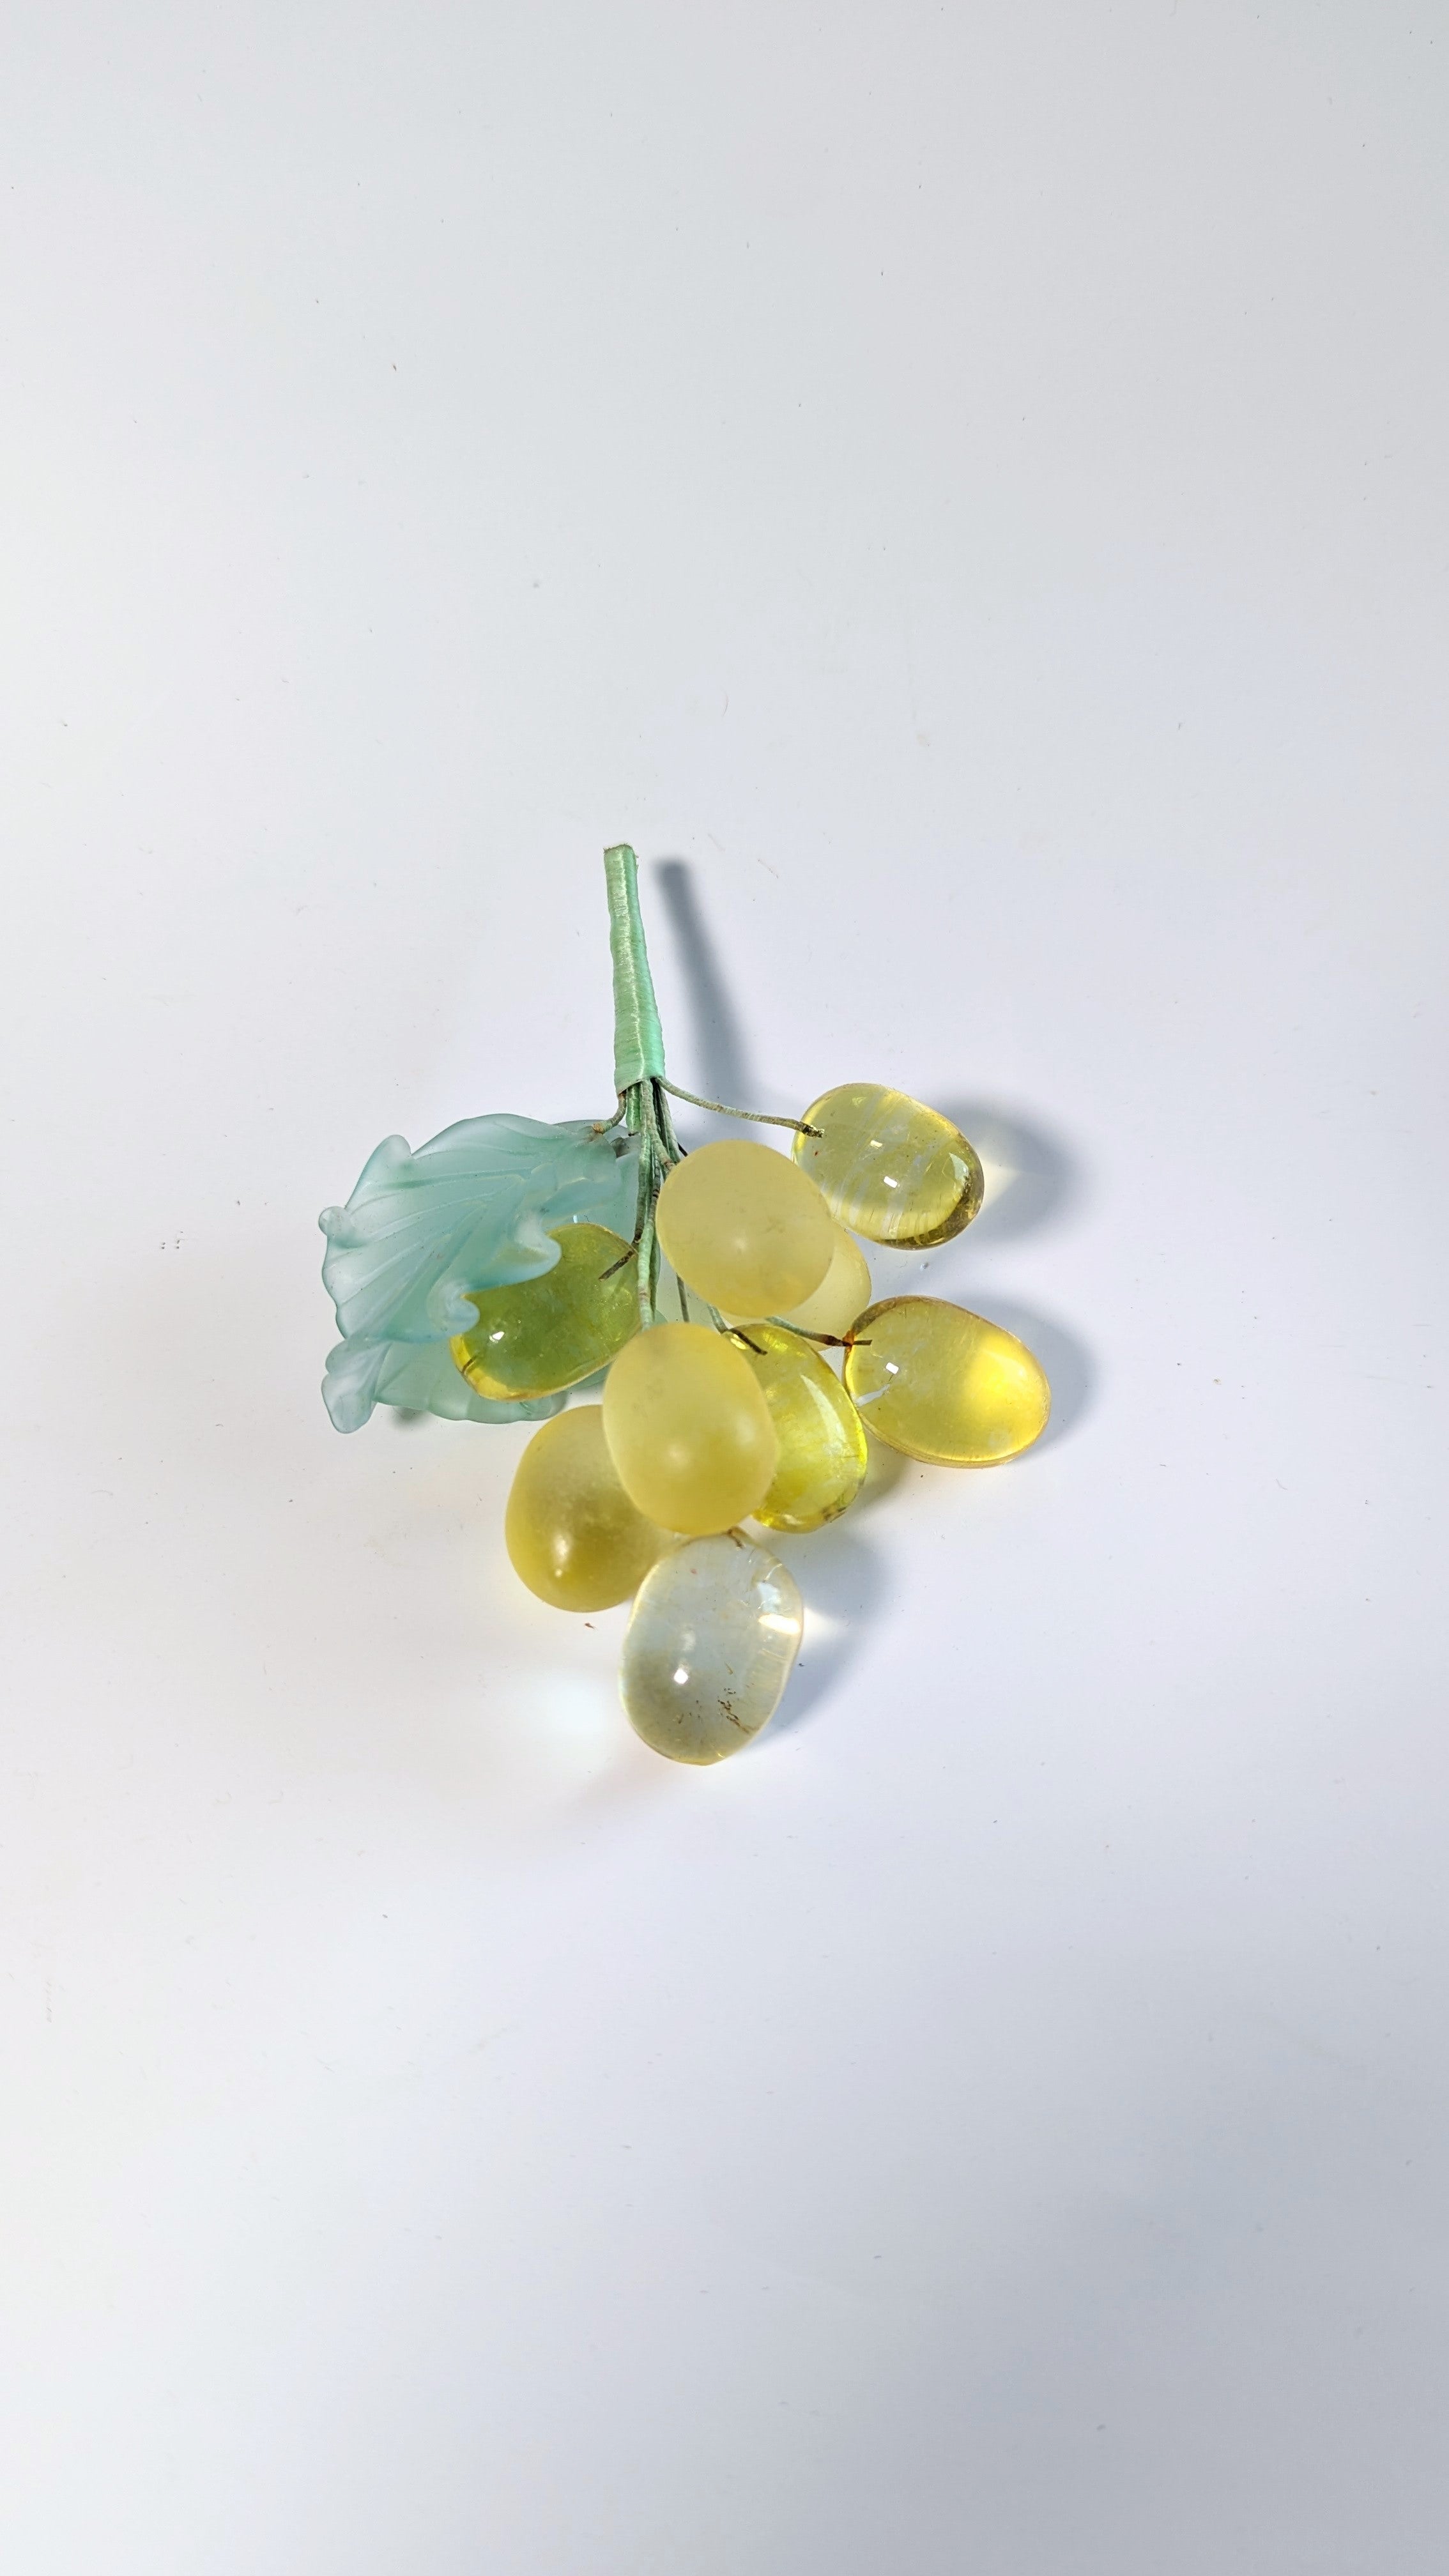 Vintage Polished Stone and Glass Grapes